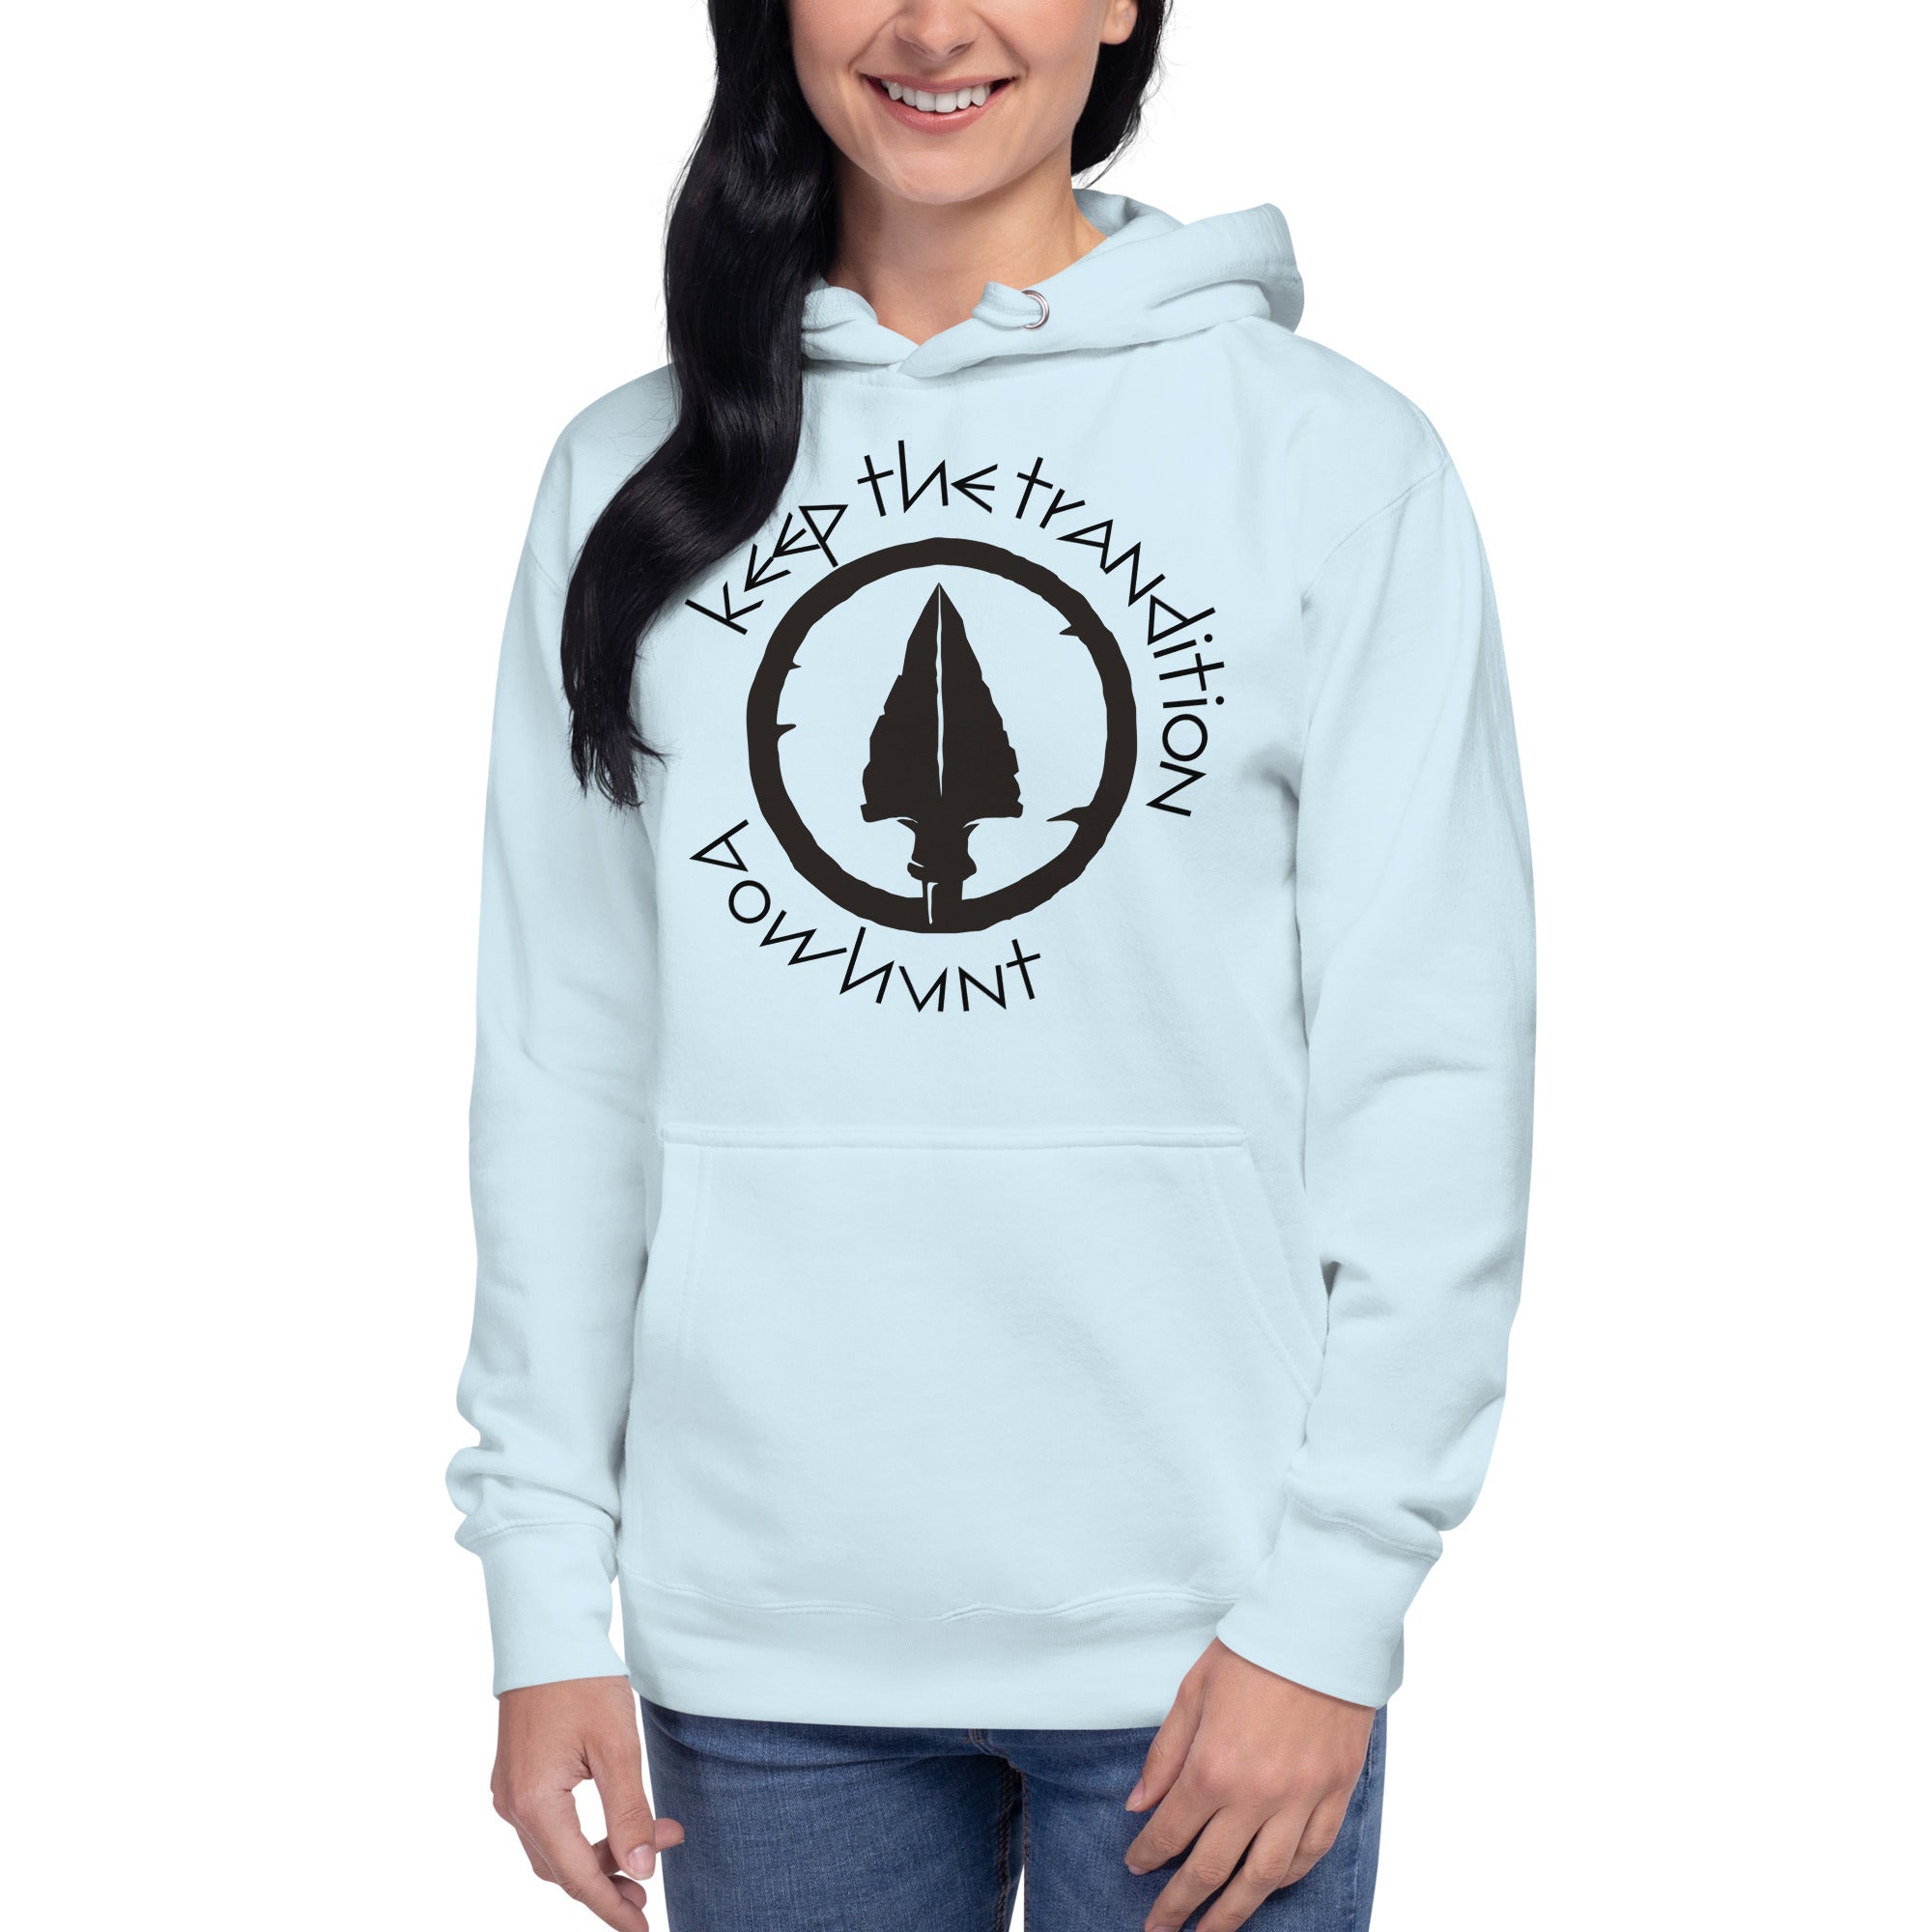 Keep The Tradition Women's Heavy Hoodie - Bow Hunt